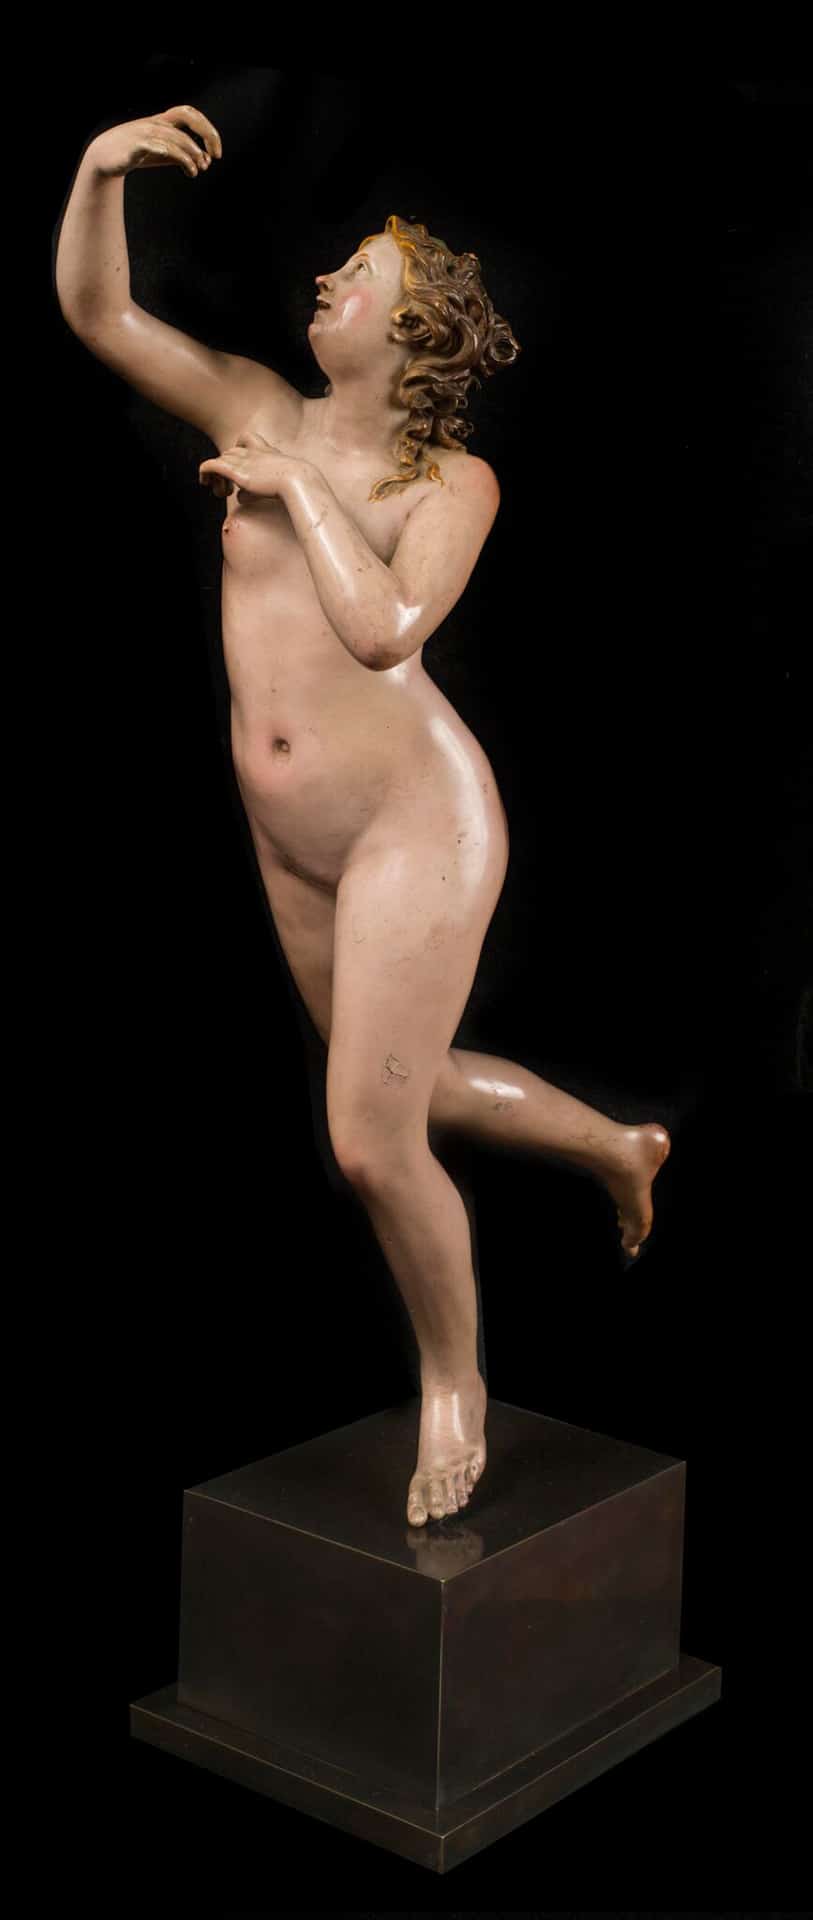 a painted sculpture of a woman running with one leg extended behind her, completely nude, arm raised as if holding something to her face